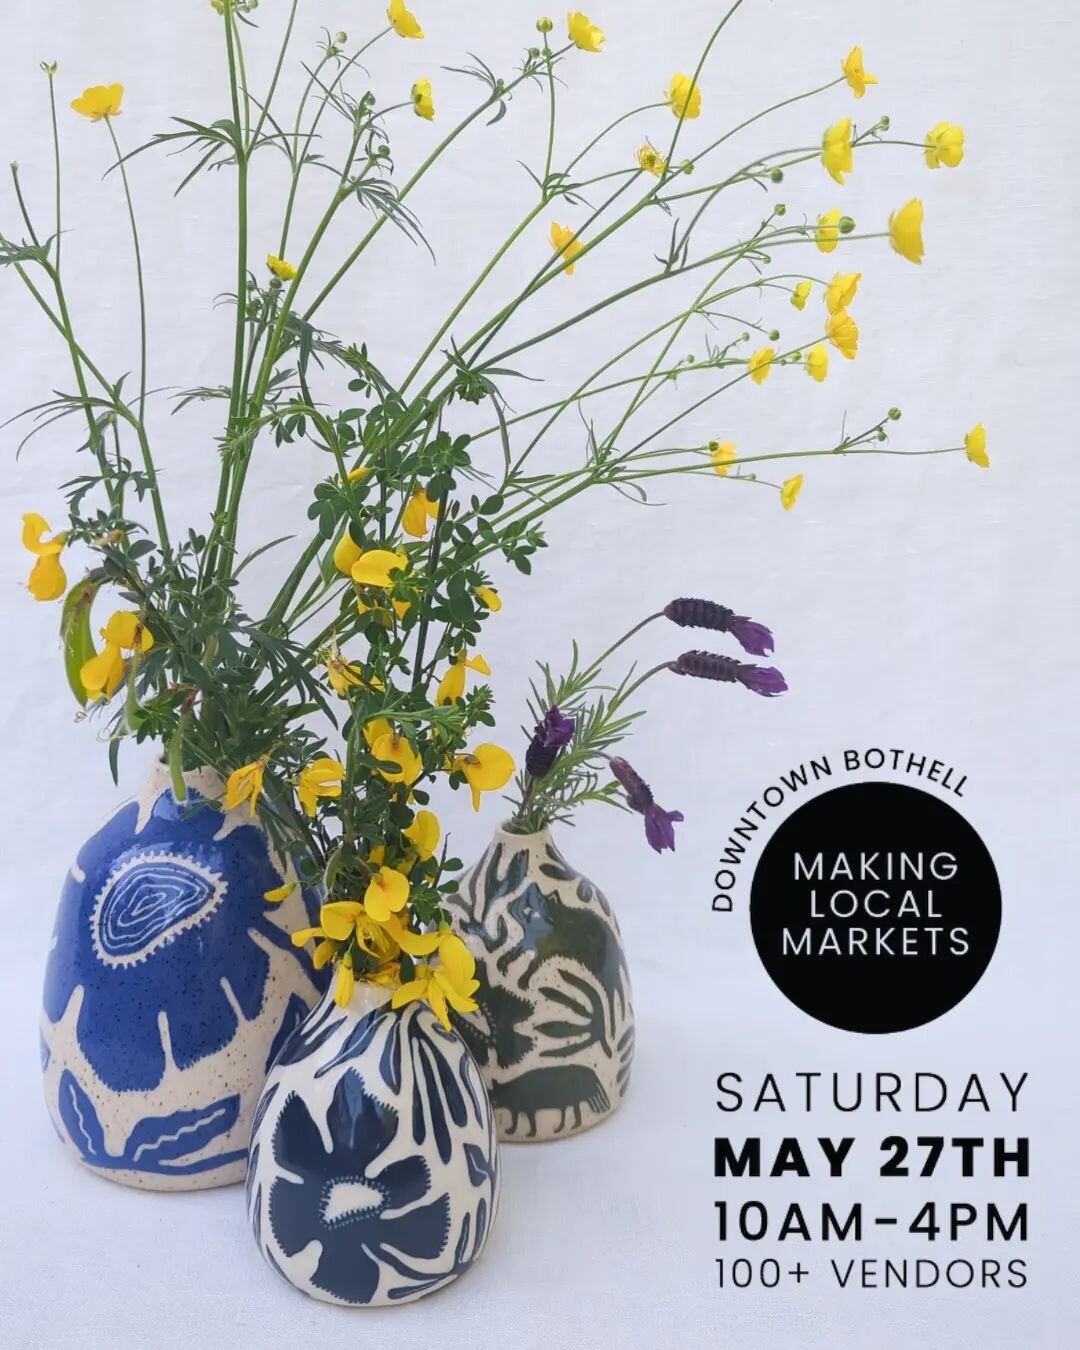 So excited to join my first Making Local Market this coming Saturday, June 27 in Bothell! @makinglocalmarkets

All the makers I've talked to who have done these markets speak very highly of them! Can't wait to meet all sorts of new people and see som